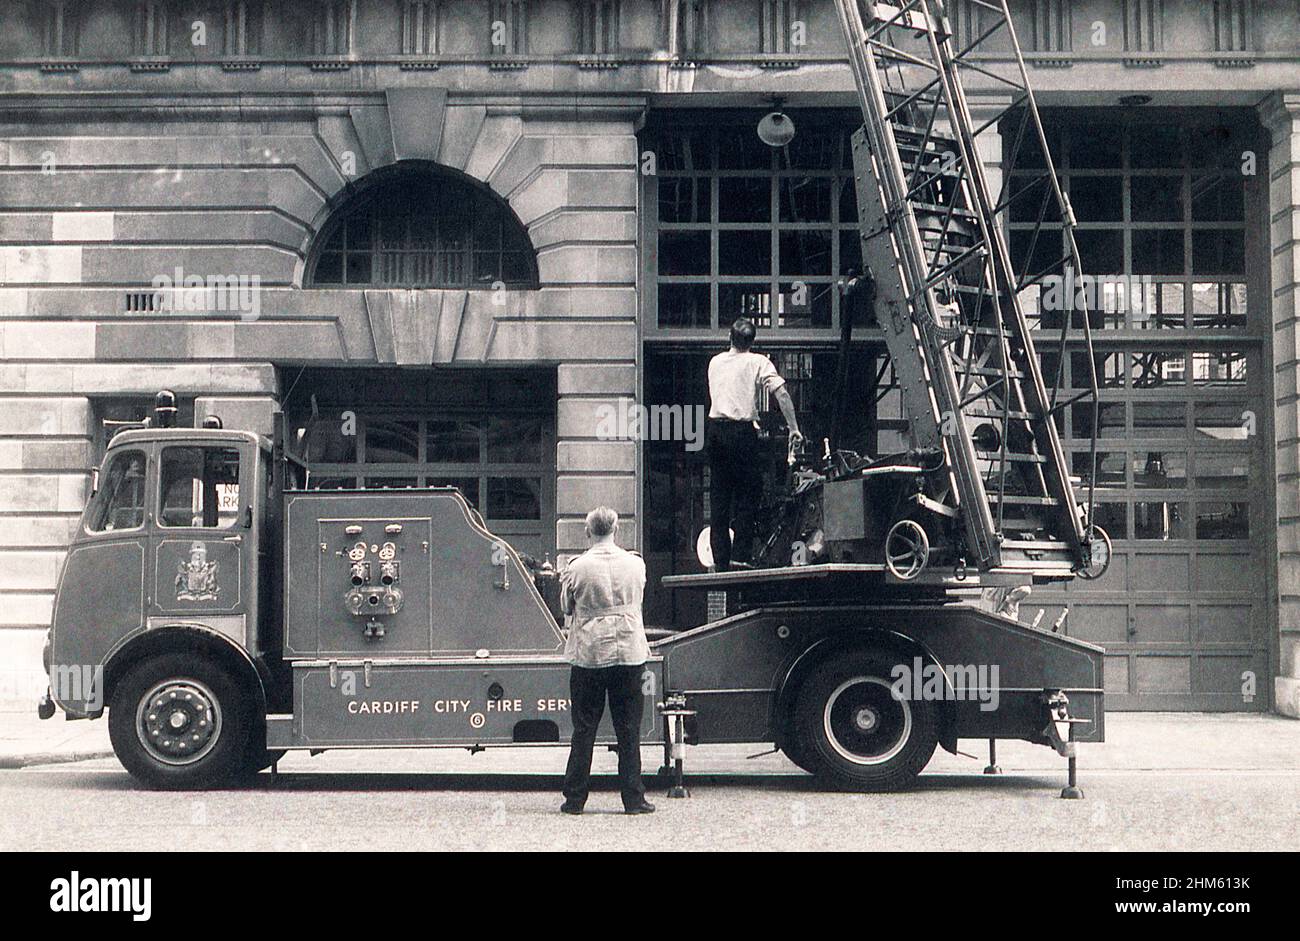 Cardiff City Fire Service engine, archive image. Stock Photo